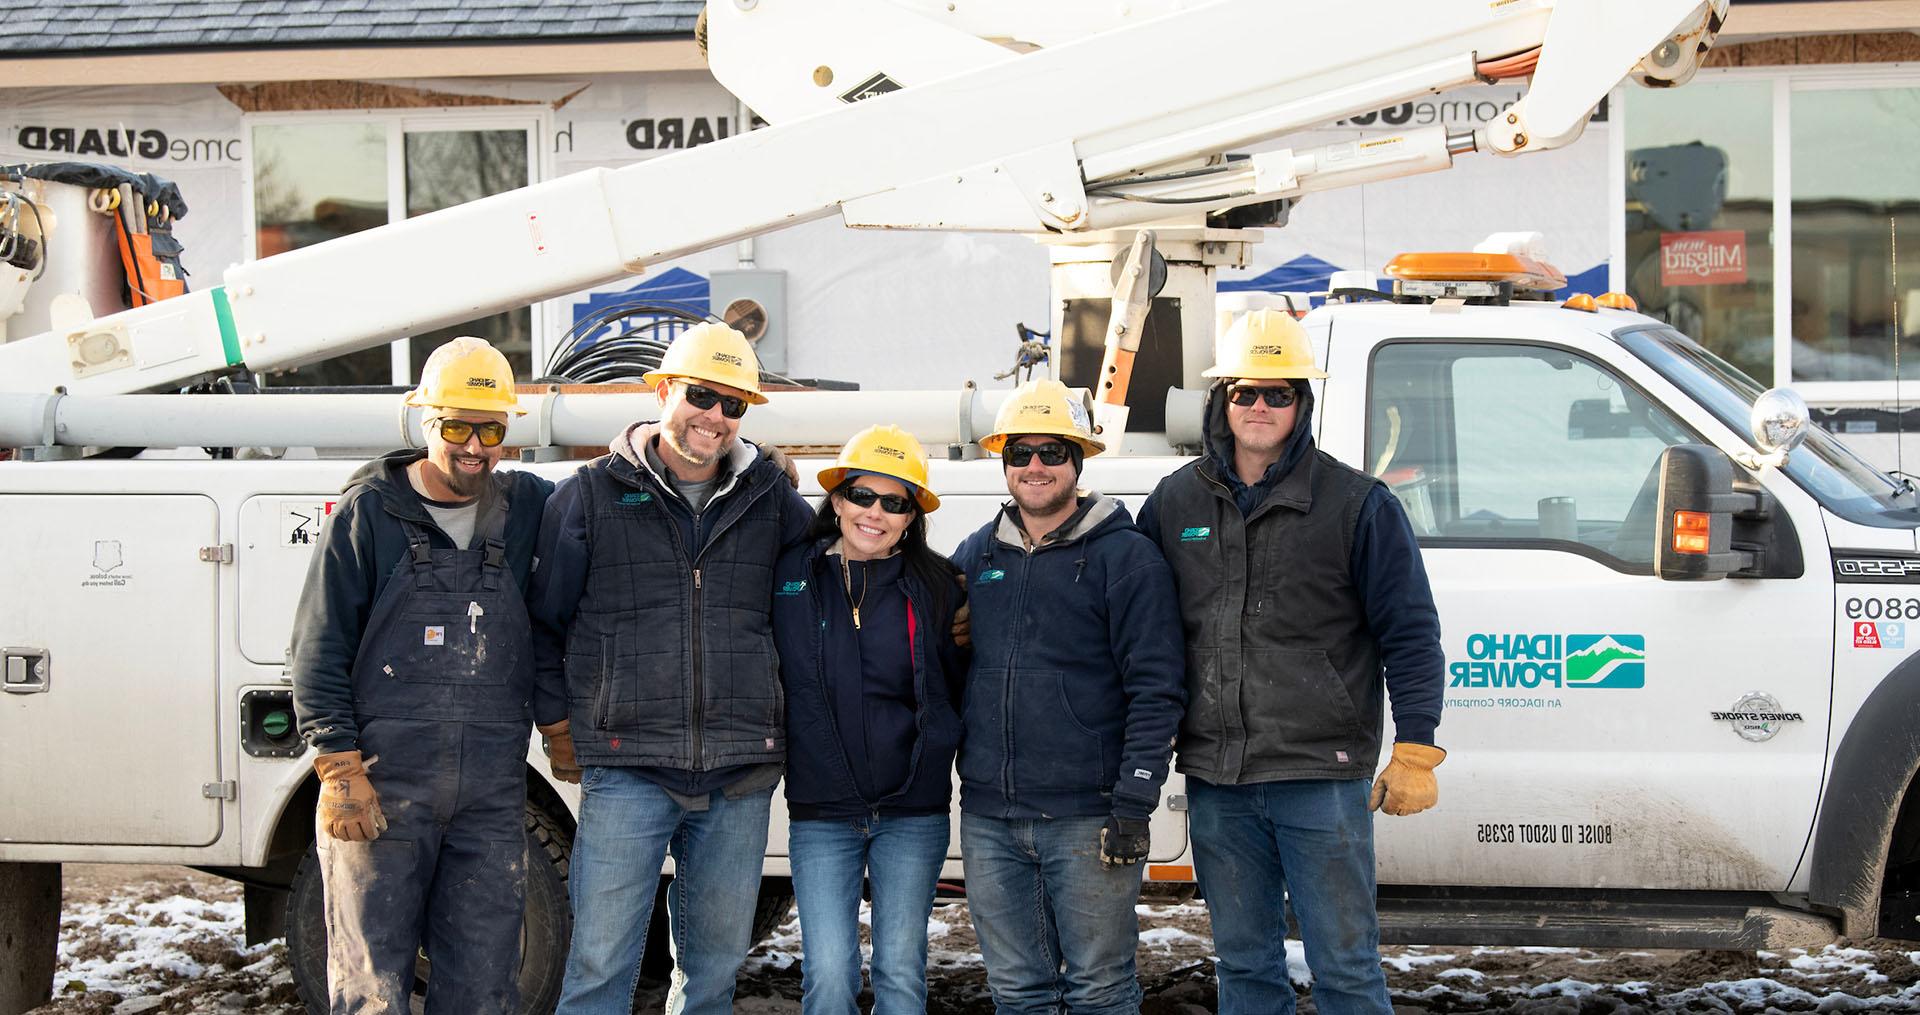 Image of Idaho Power employees in the field beside a truck